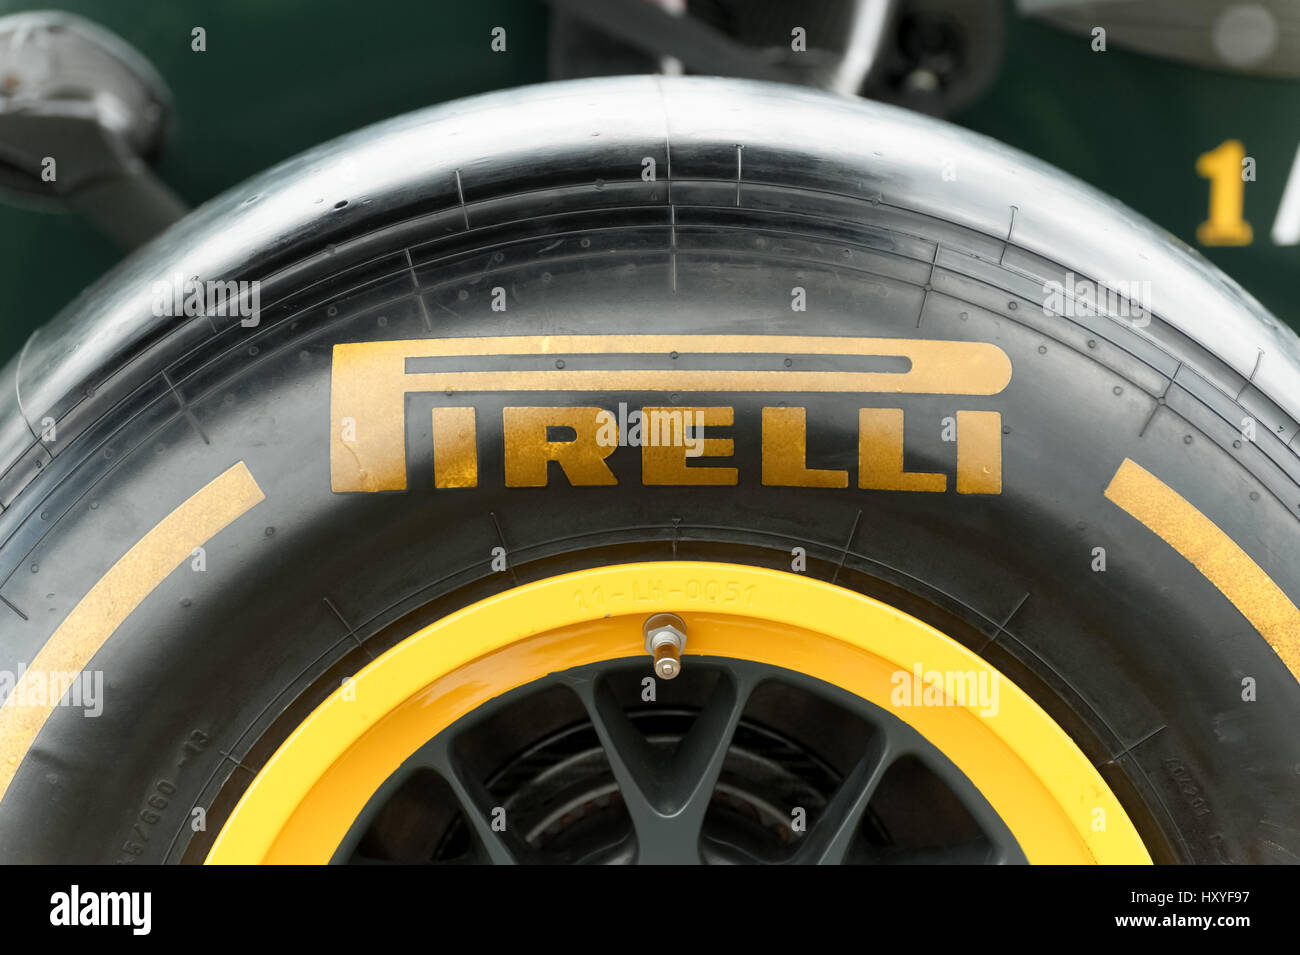 FARNBOROUGH, UK - JULY 15: Closeup of a Pirelli tyre attached to a Caterham Formula 1 race car on static display at the Farnborough Airshow, UK on Jul Stock Photo